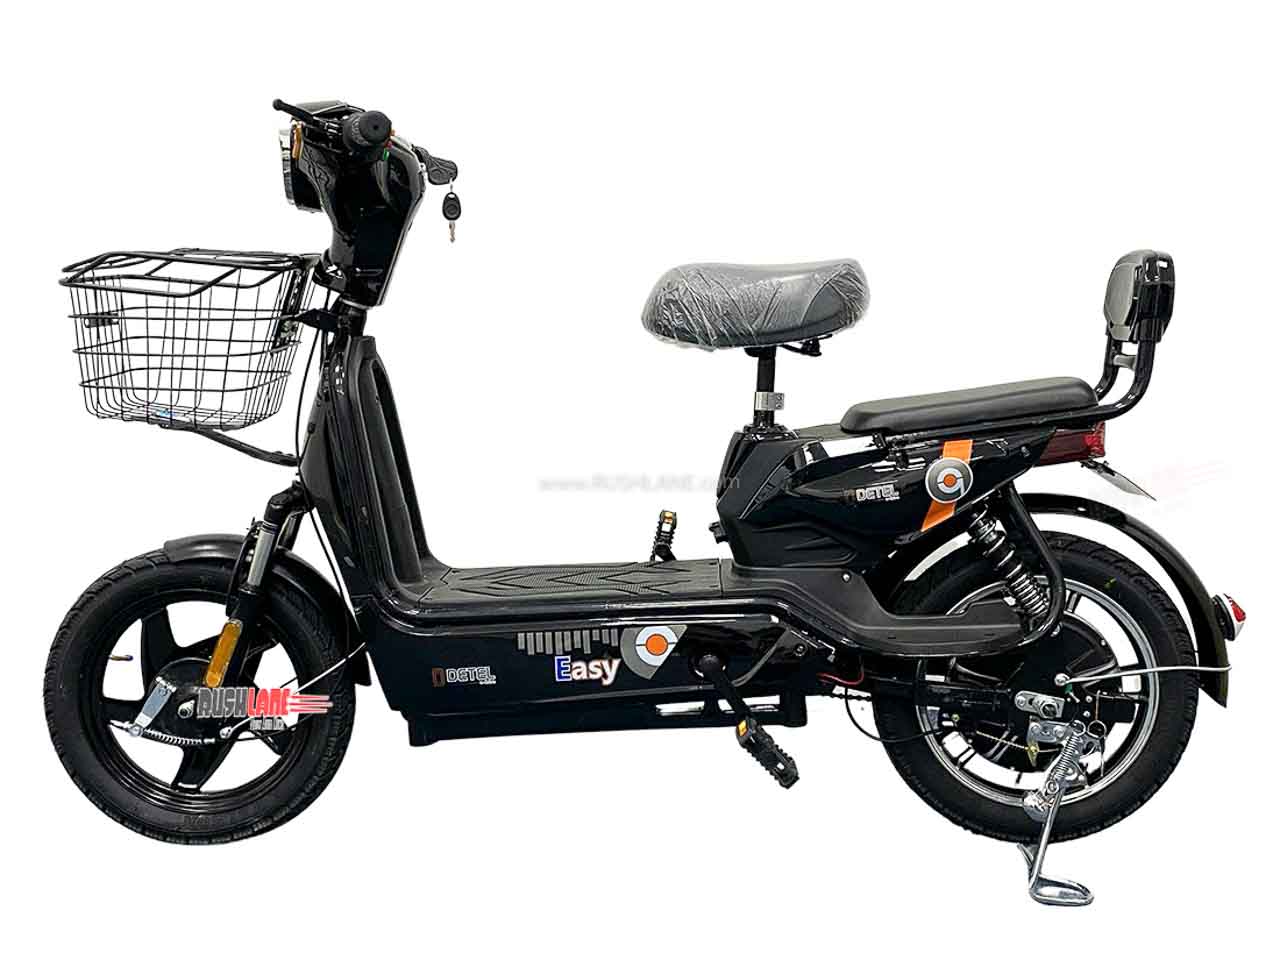 Detel Easy electric bike costs less than 20 thousand, what's the specialty